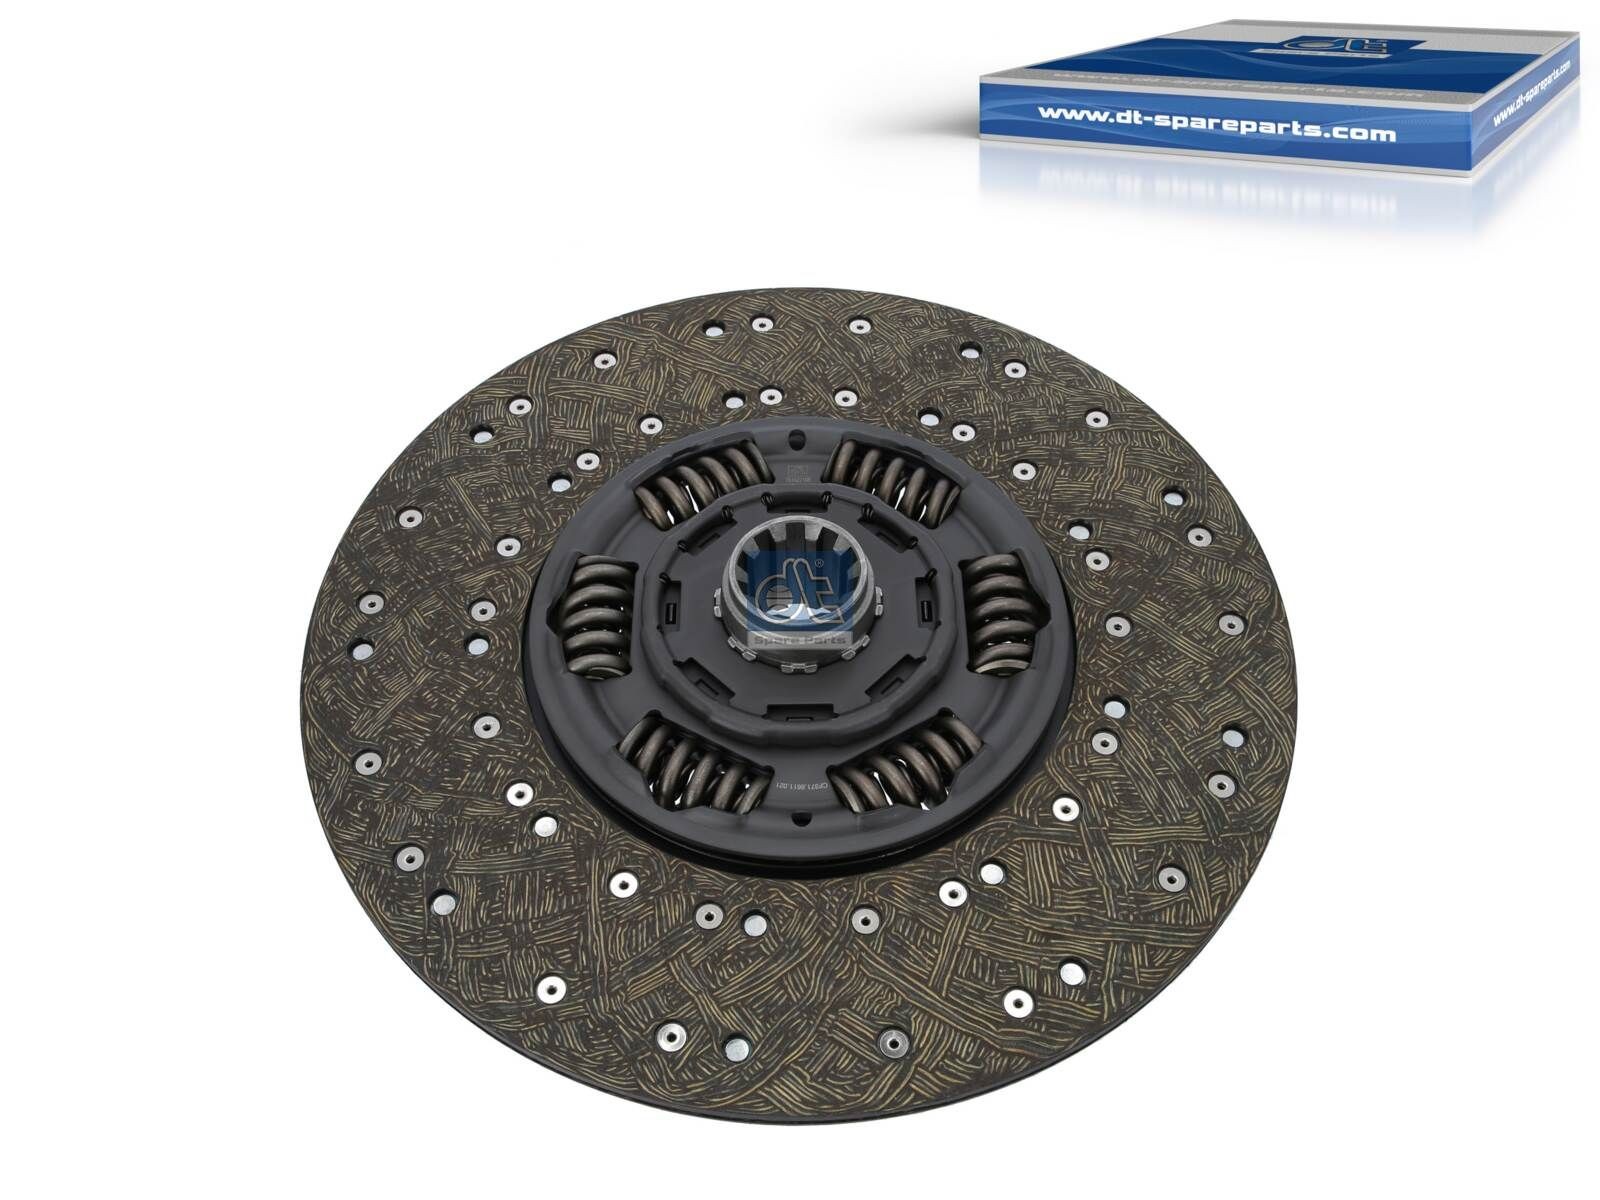 DT Spare Parts 430mm Clutch Plate 3.40021 buy